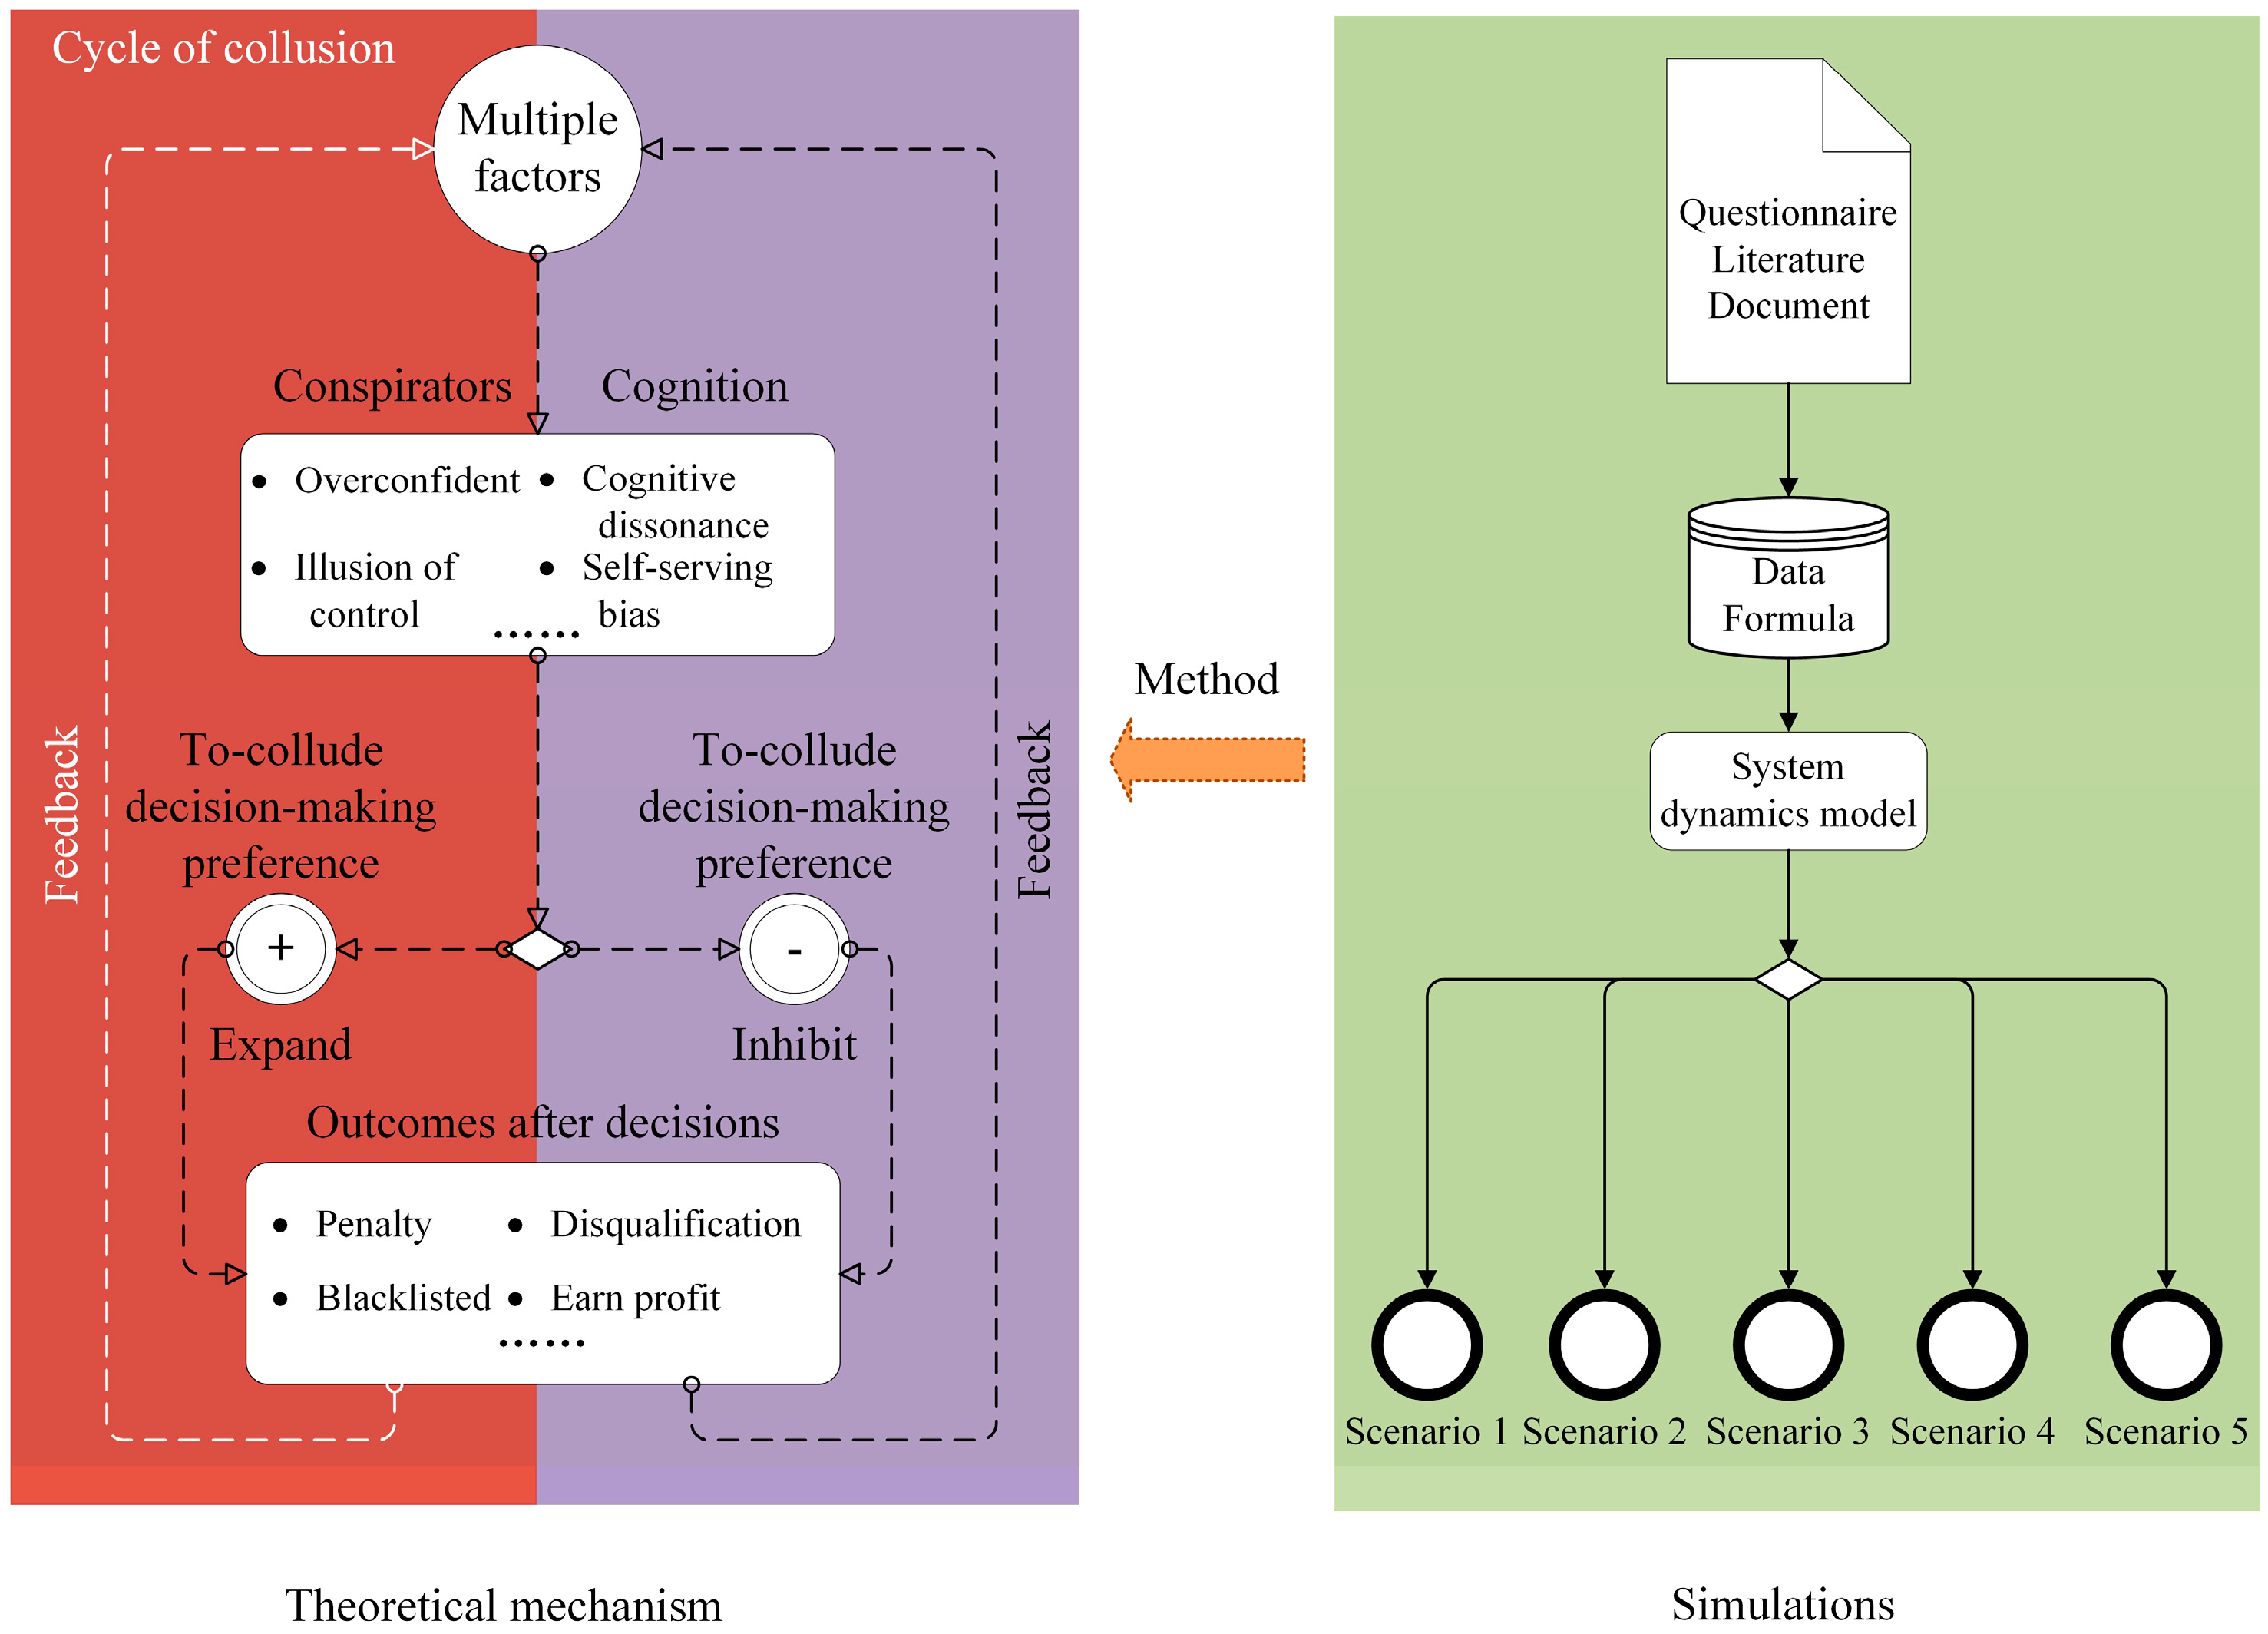 Buildings | Free Full-Text | Break the Cycle of Collusion: Simulation to  Influence Mechanism of Cognitive Bias on To-Collude Decision Making